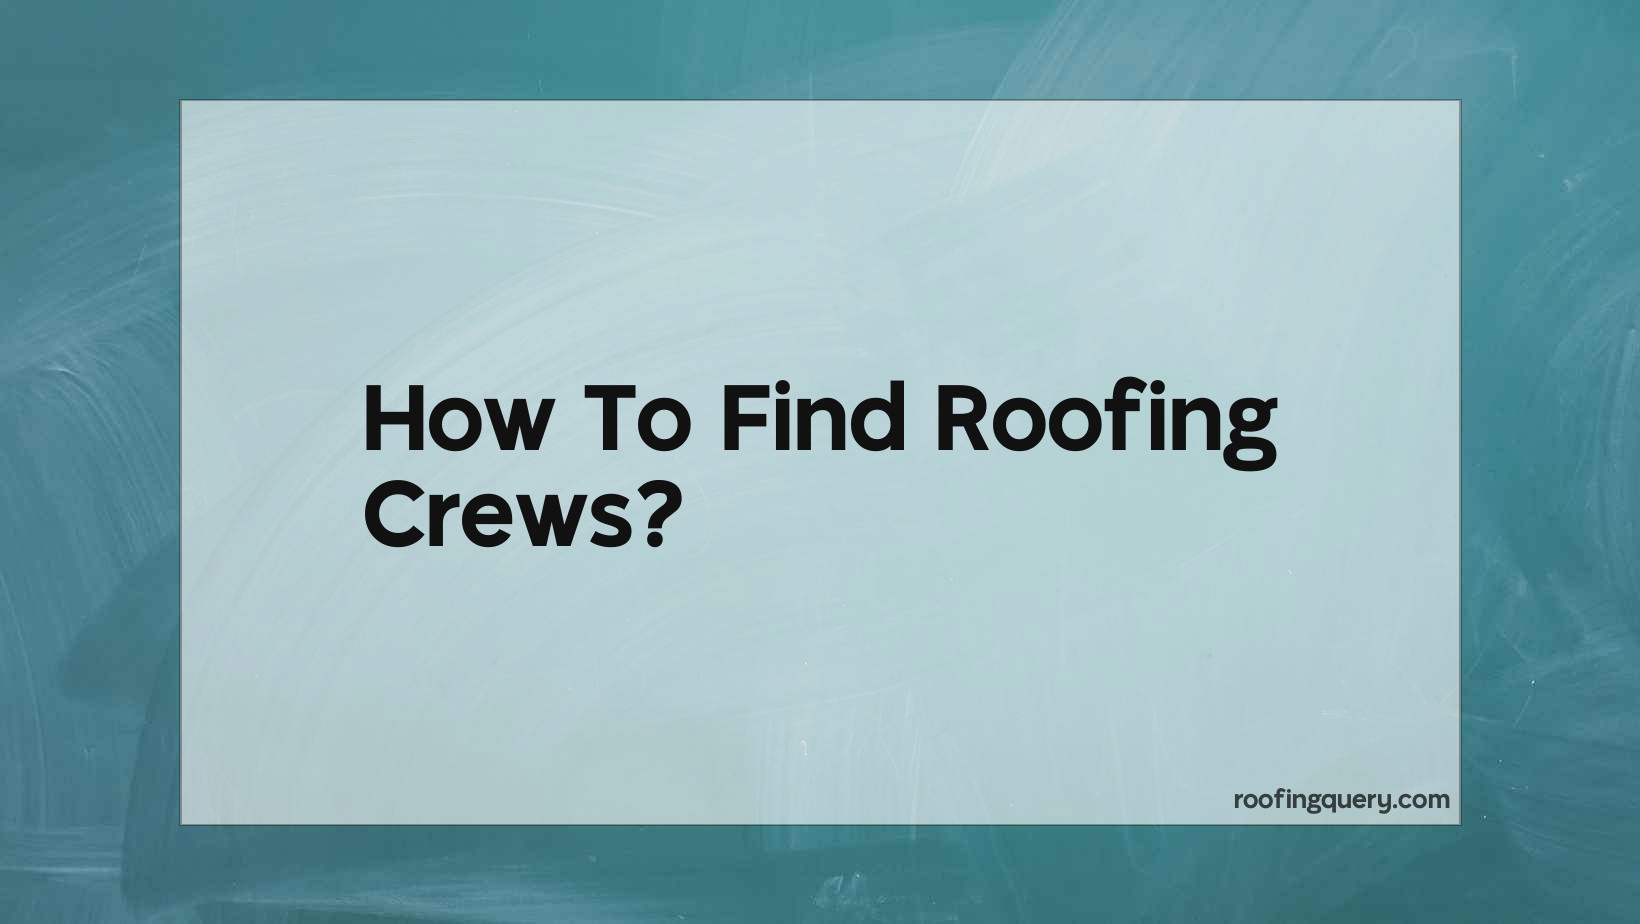 How To Find Roofing Crews?